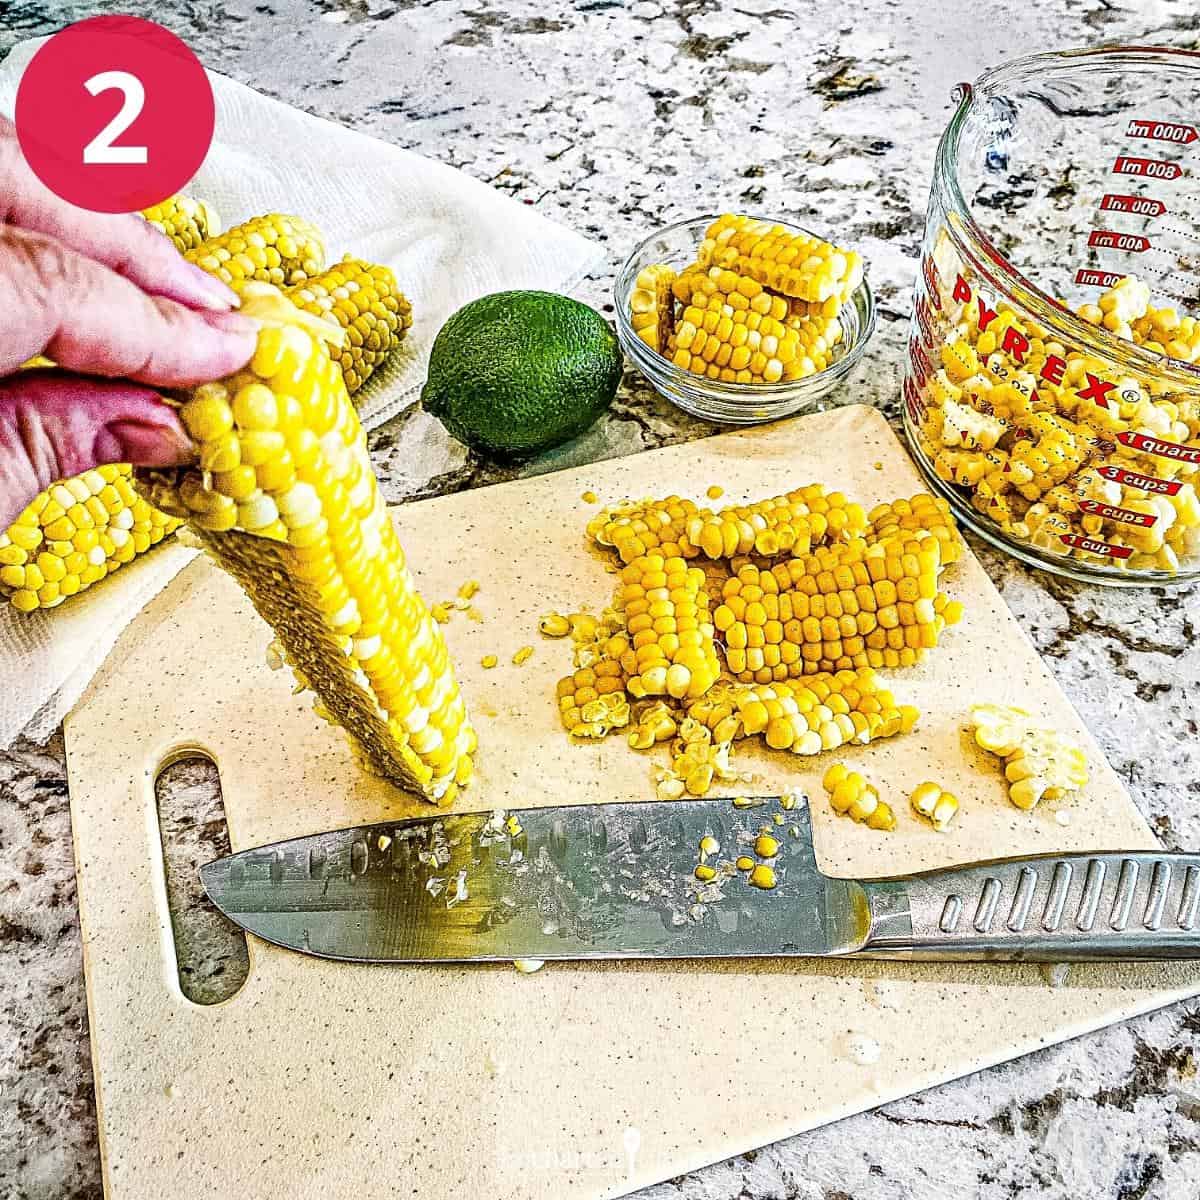 Cutting the kernels of corn from the cob.